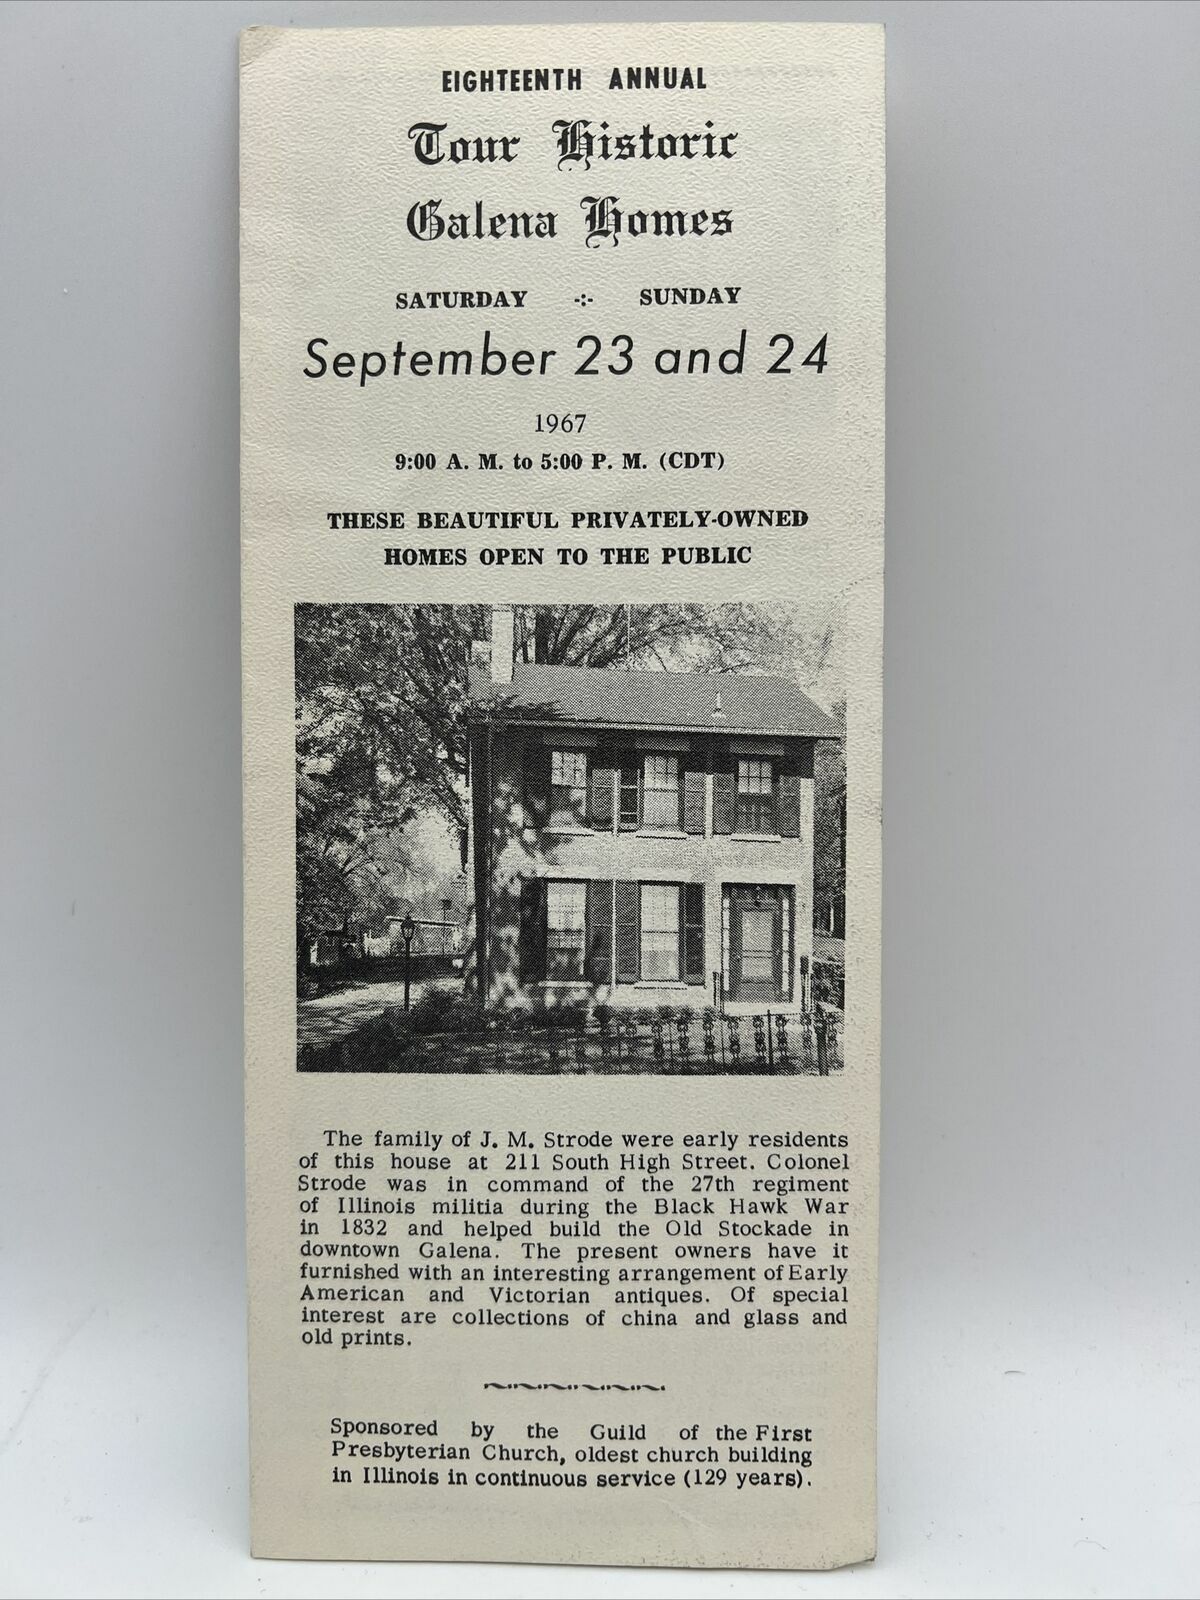 1967 EIGHTEENTH ANNUAL TOUR HISTORIC GALENA HOMES Illinois Travel Guide Brochure